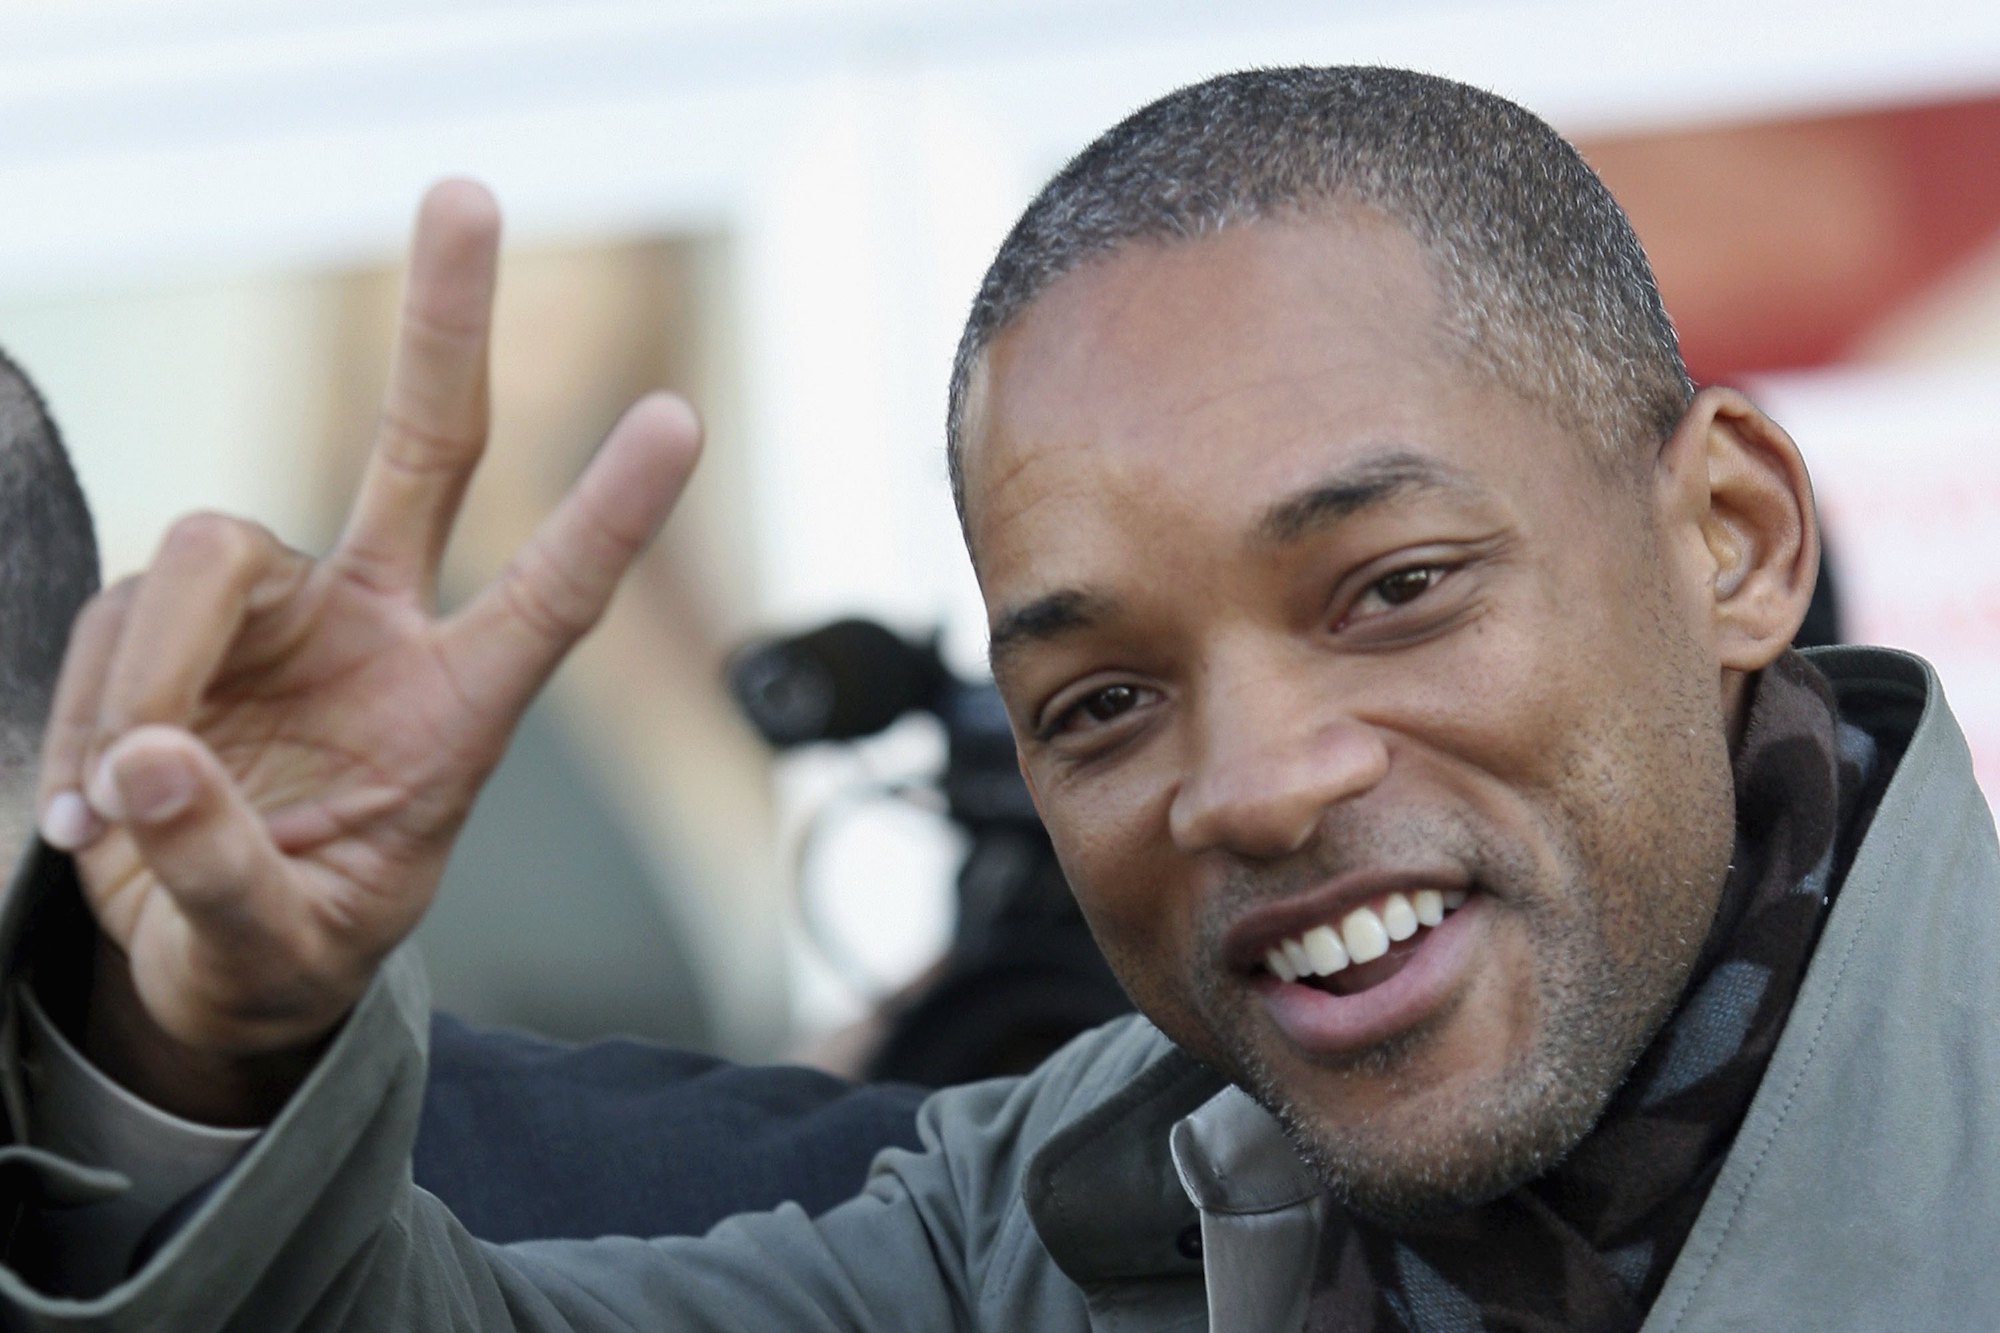 Will Smith smiling, holding up a peace sign